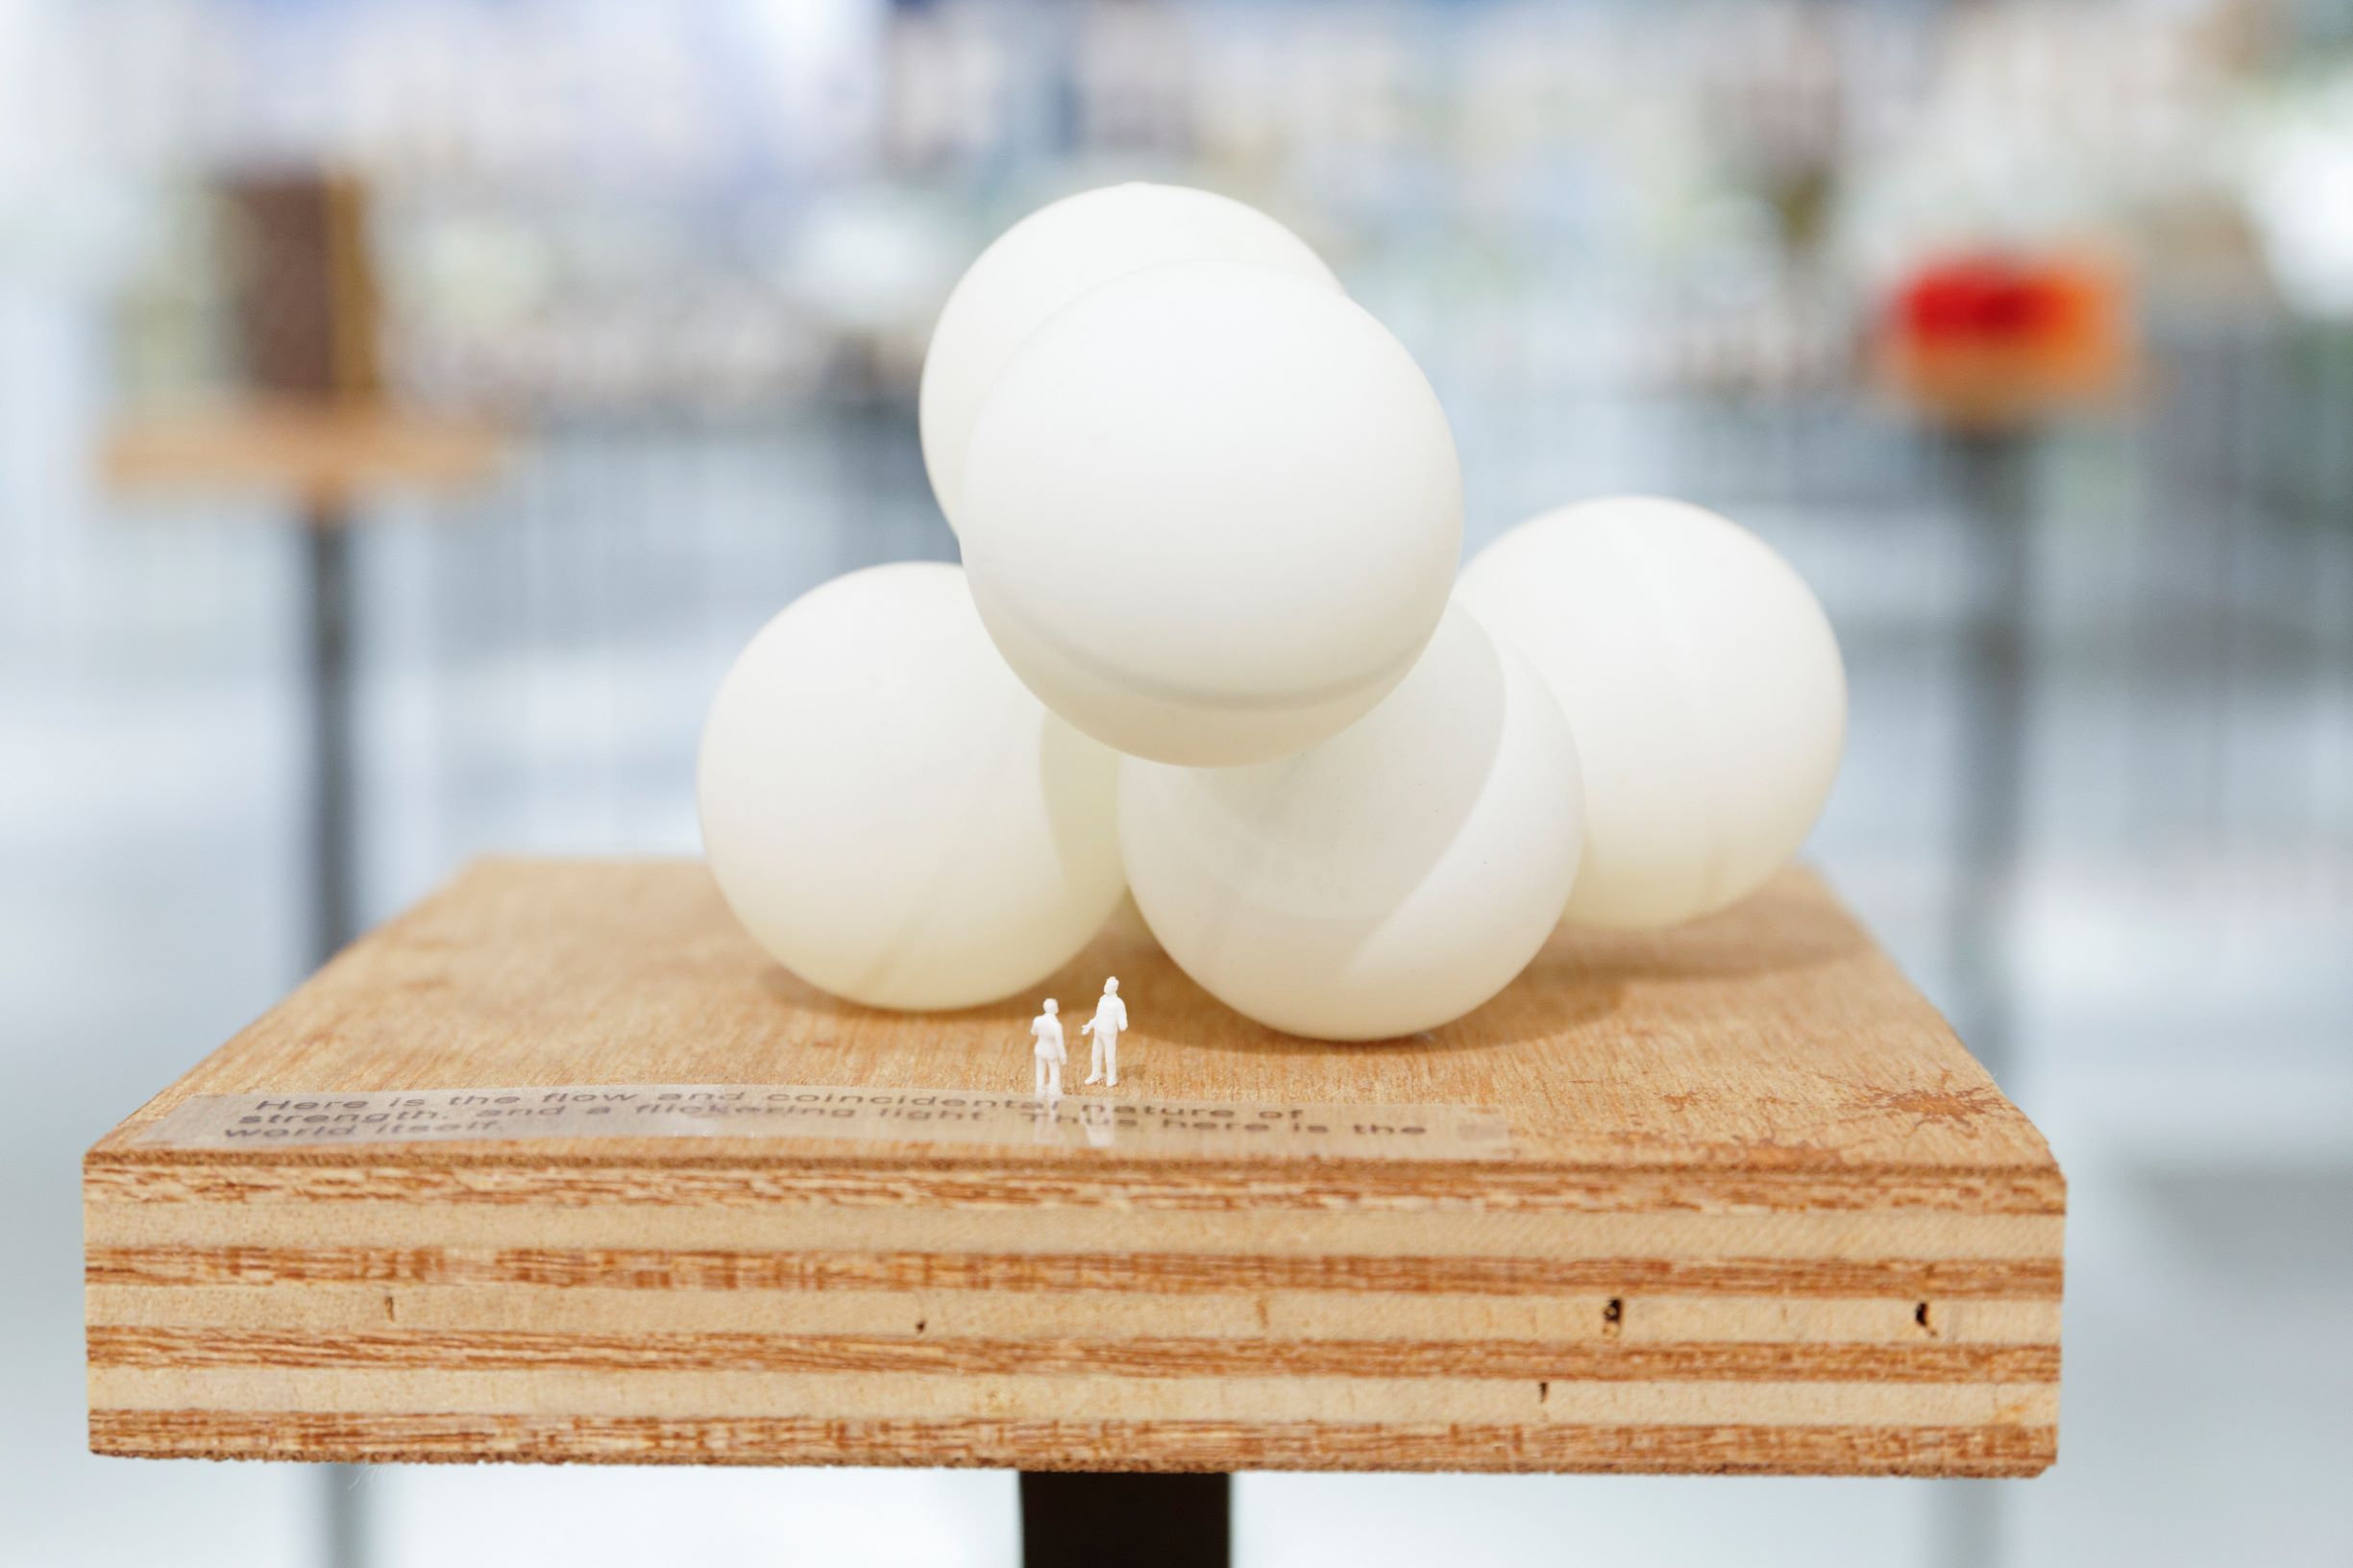 ping pong balls and figurines